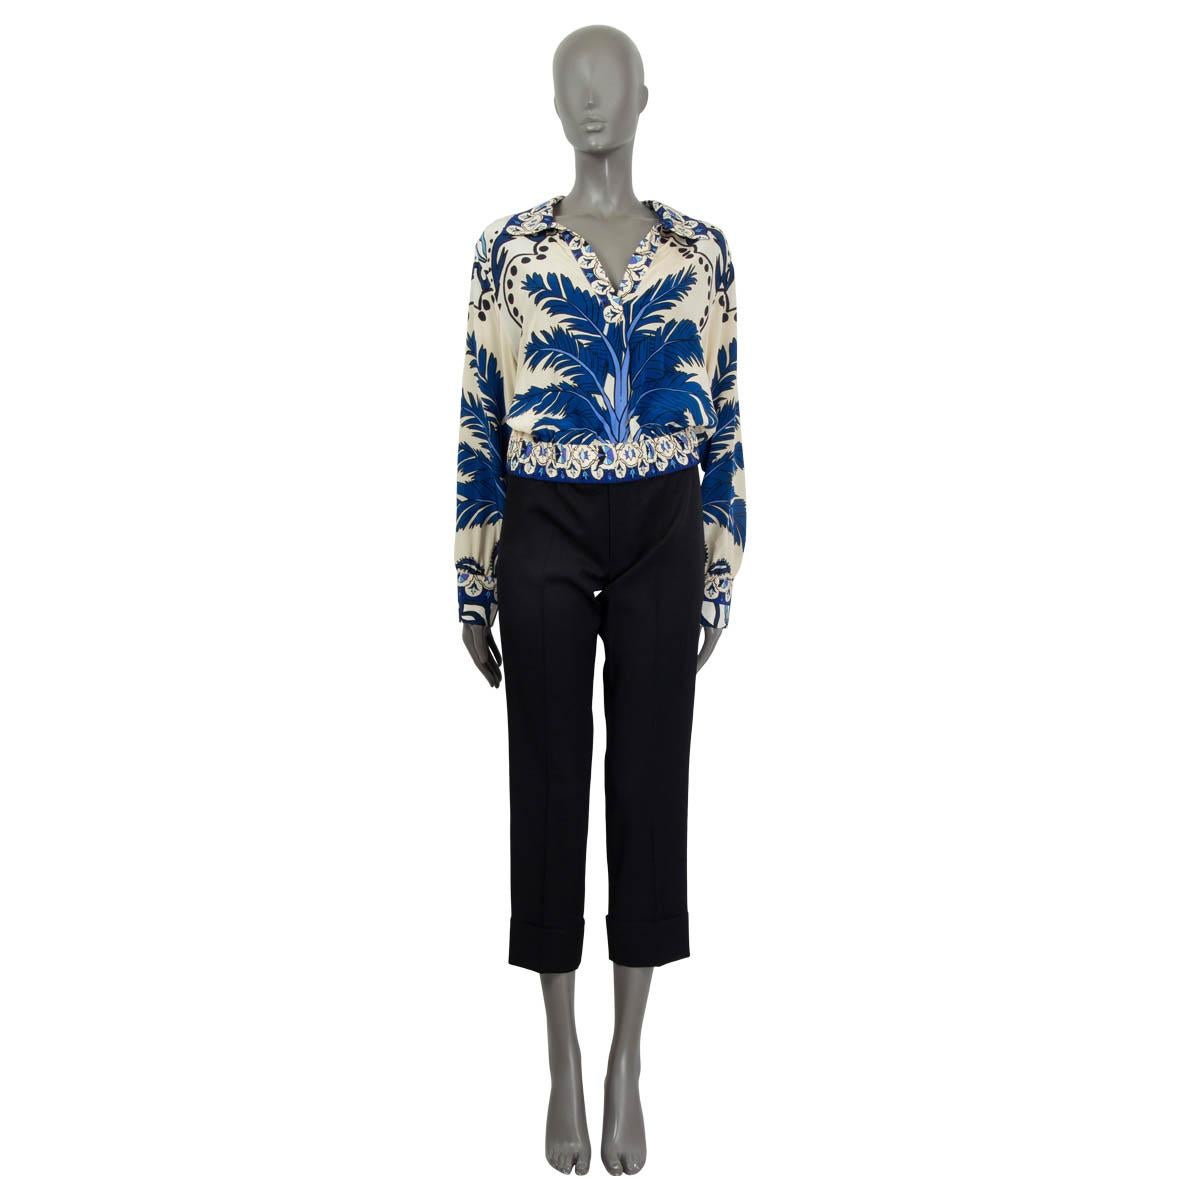 100% authentic Johanna Ortiz  'Al Son De La Palmera' cropped blouse in ivory, blue, purple and navy silk crepe de chine (100%). Features long sleeves, buttoned cuffs and an elastic waistband. Unlined. Has been worn and is in excellent